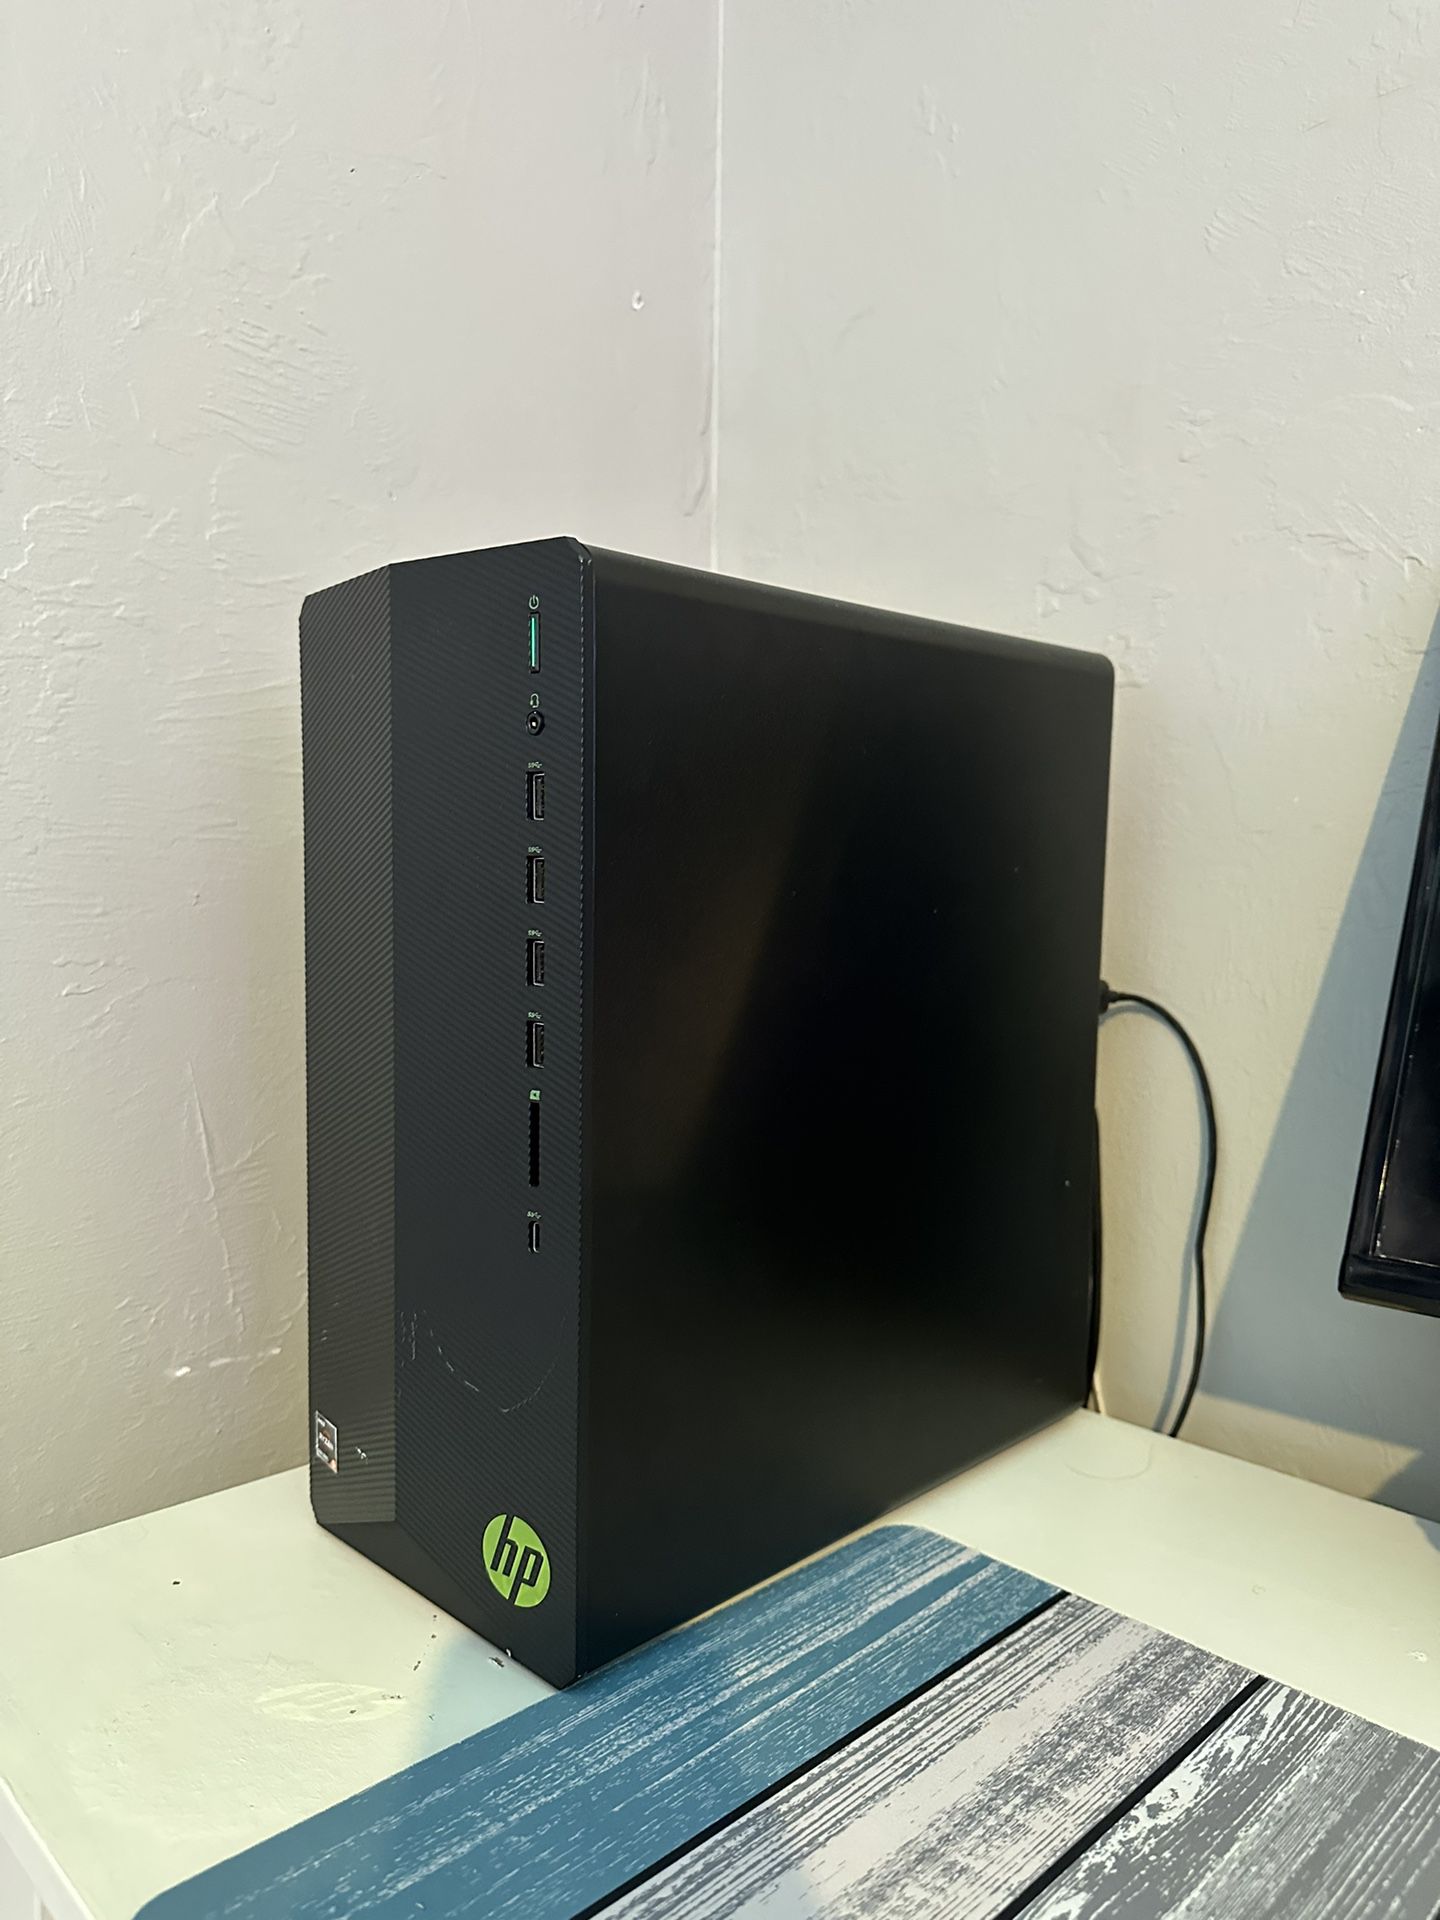 Hp pavilion gaming for in Norman, - OfferUp